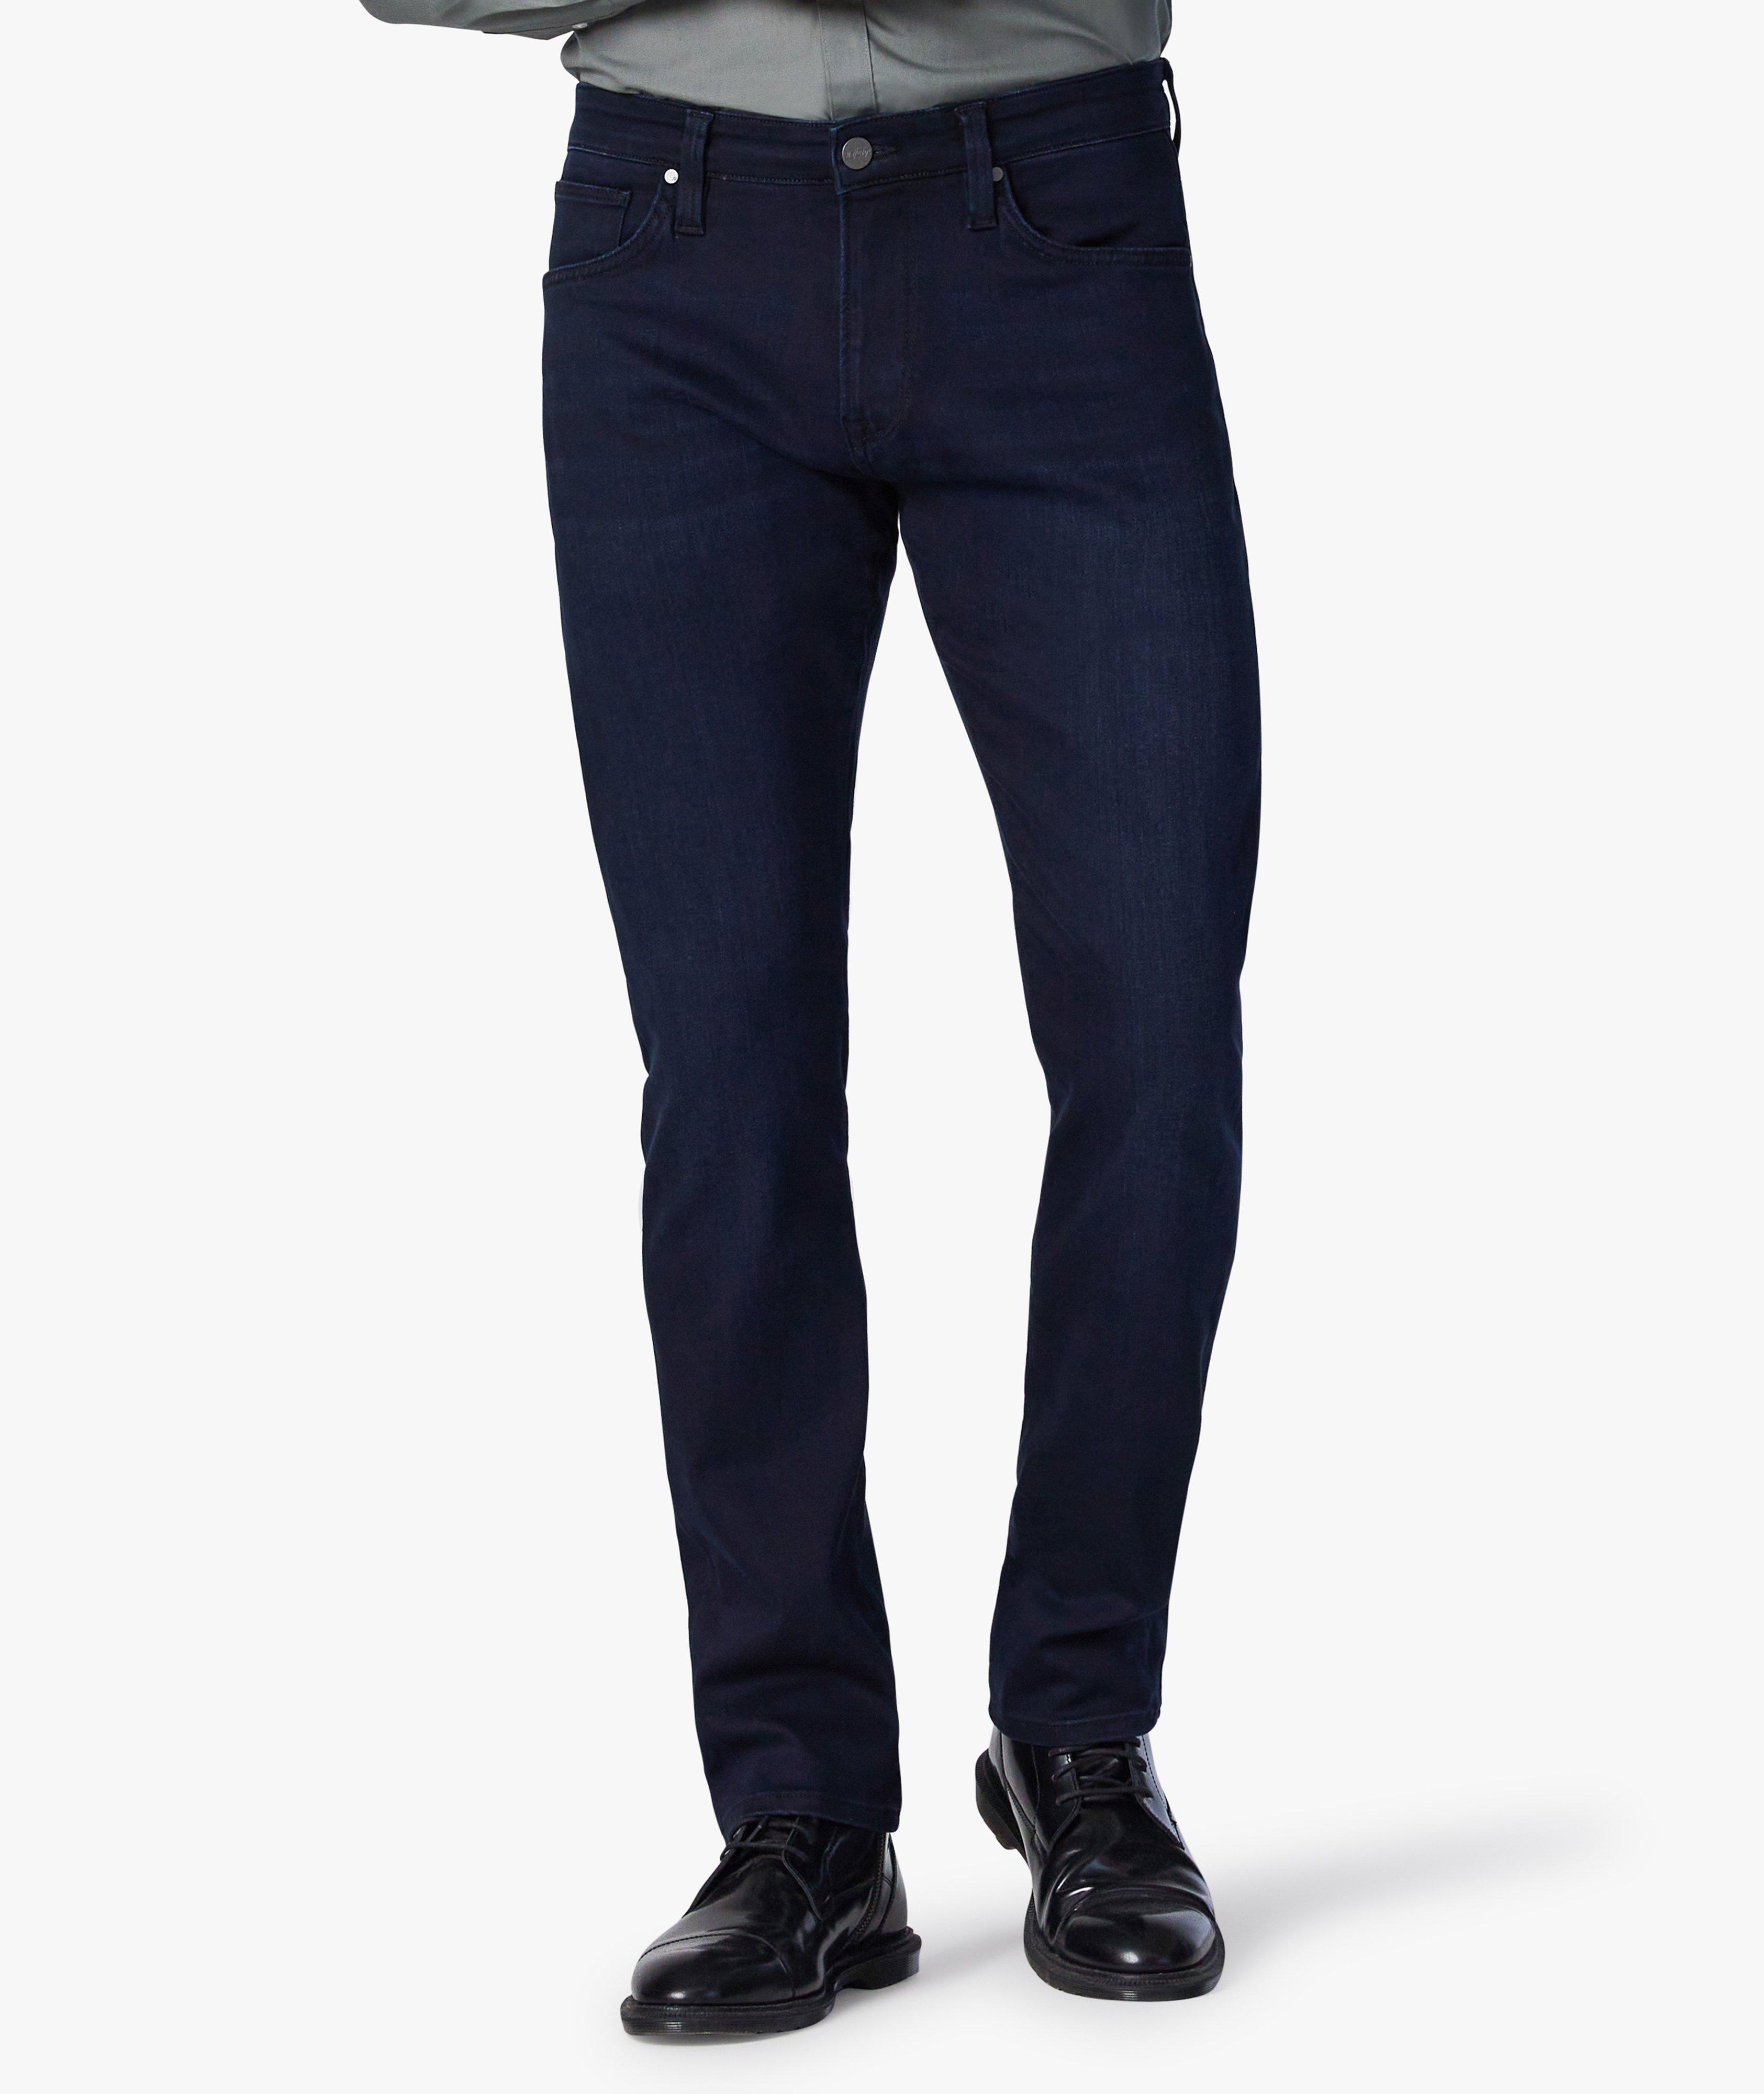 Cool Tapered Leg Jeans image 0